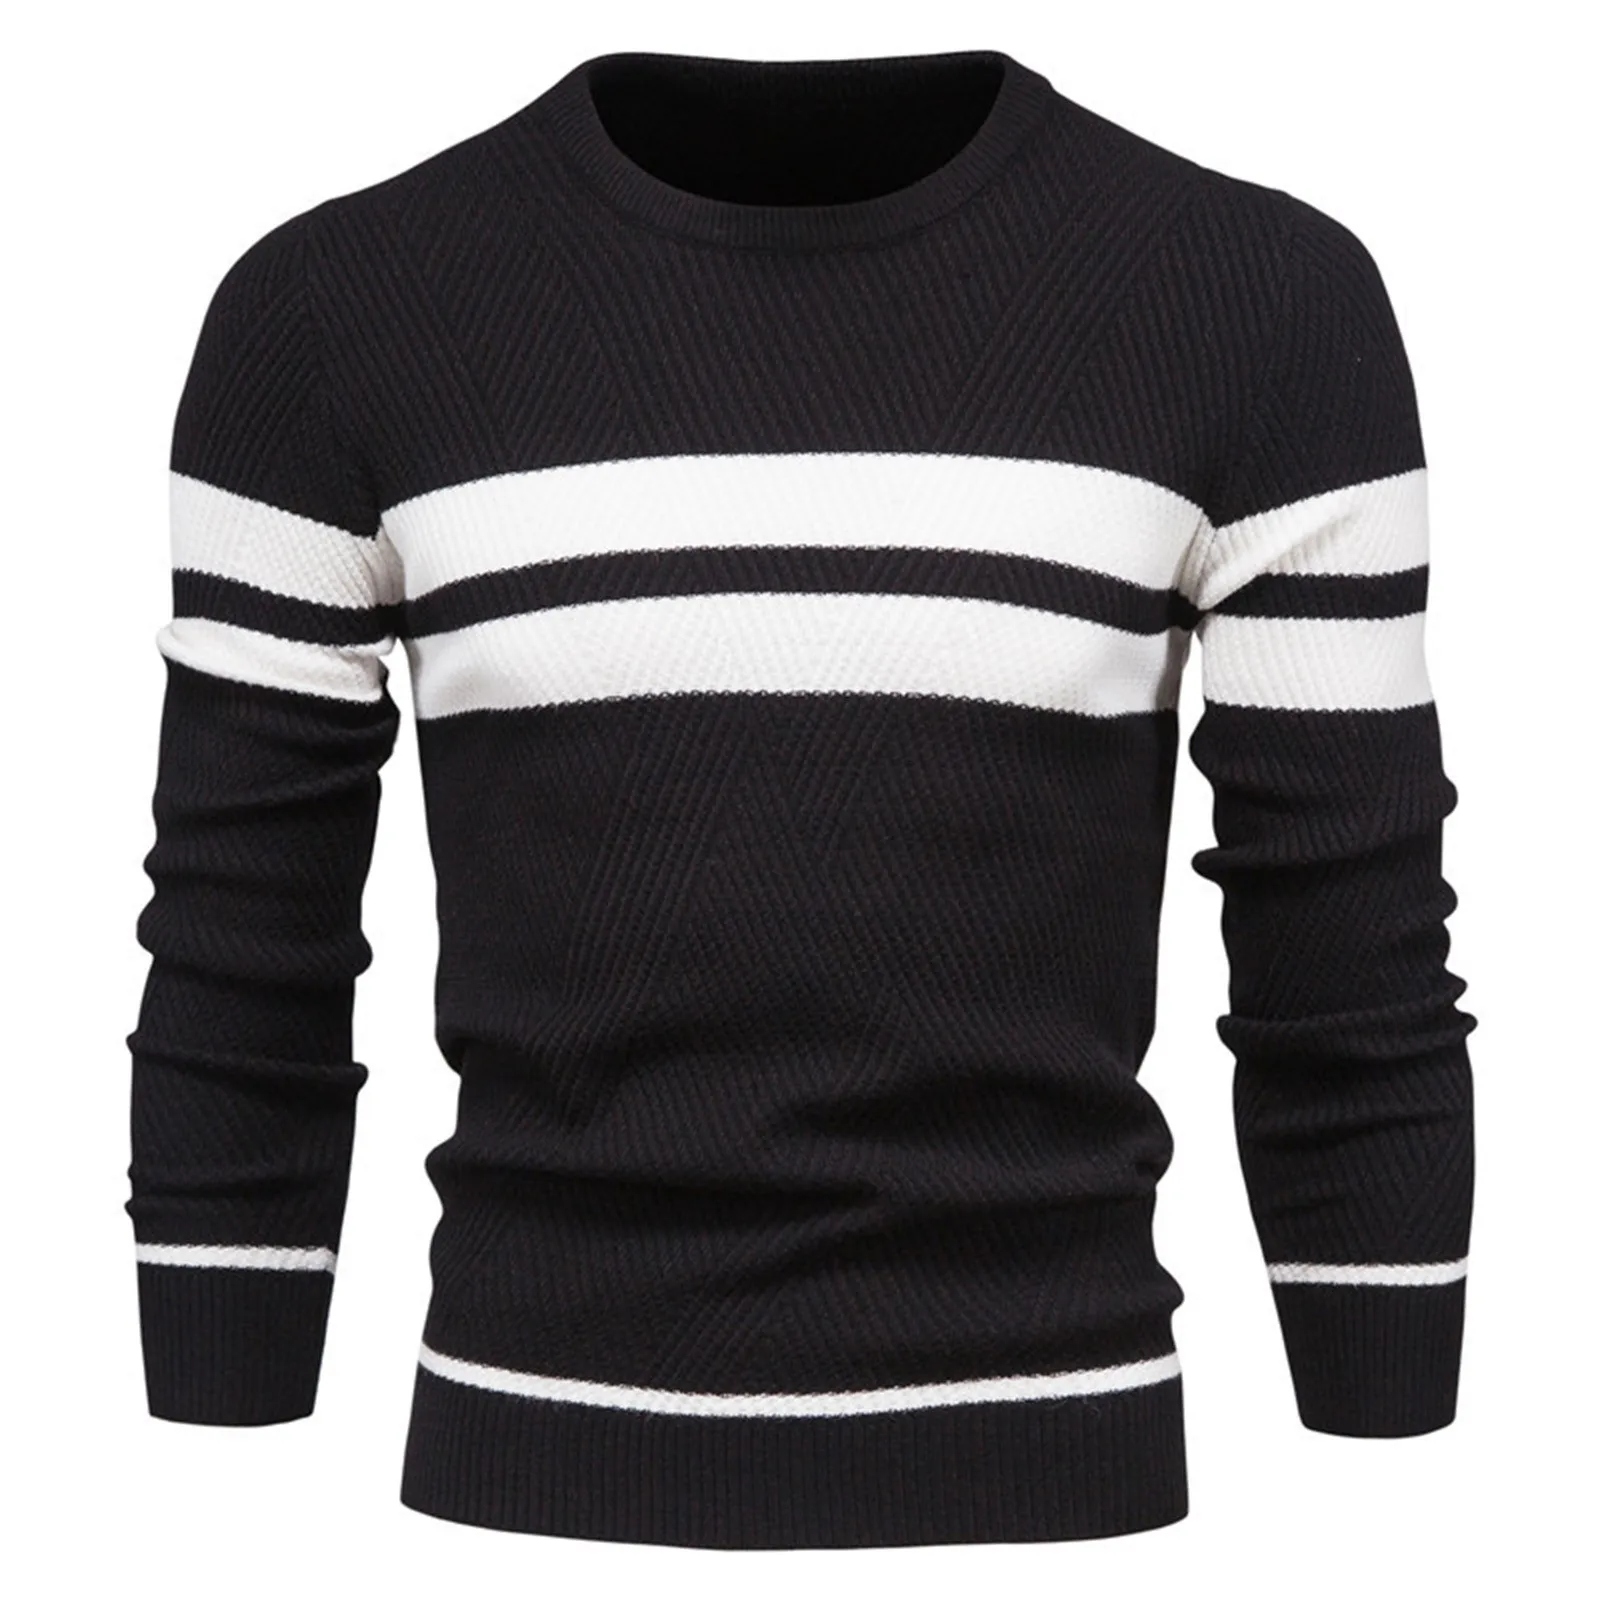 

Men Knit Sweater Pullover Basic Thermal Knitted Sweaters Long Sleeve Round Neck Shirt Striped Elegant Keep Warm Knitwear Winter